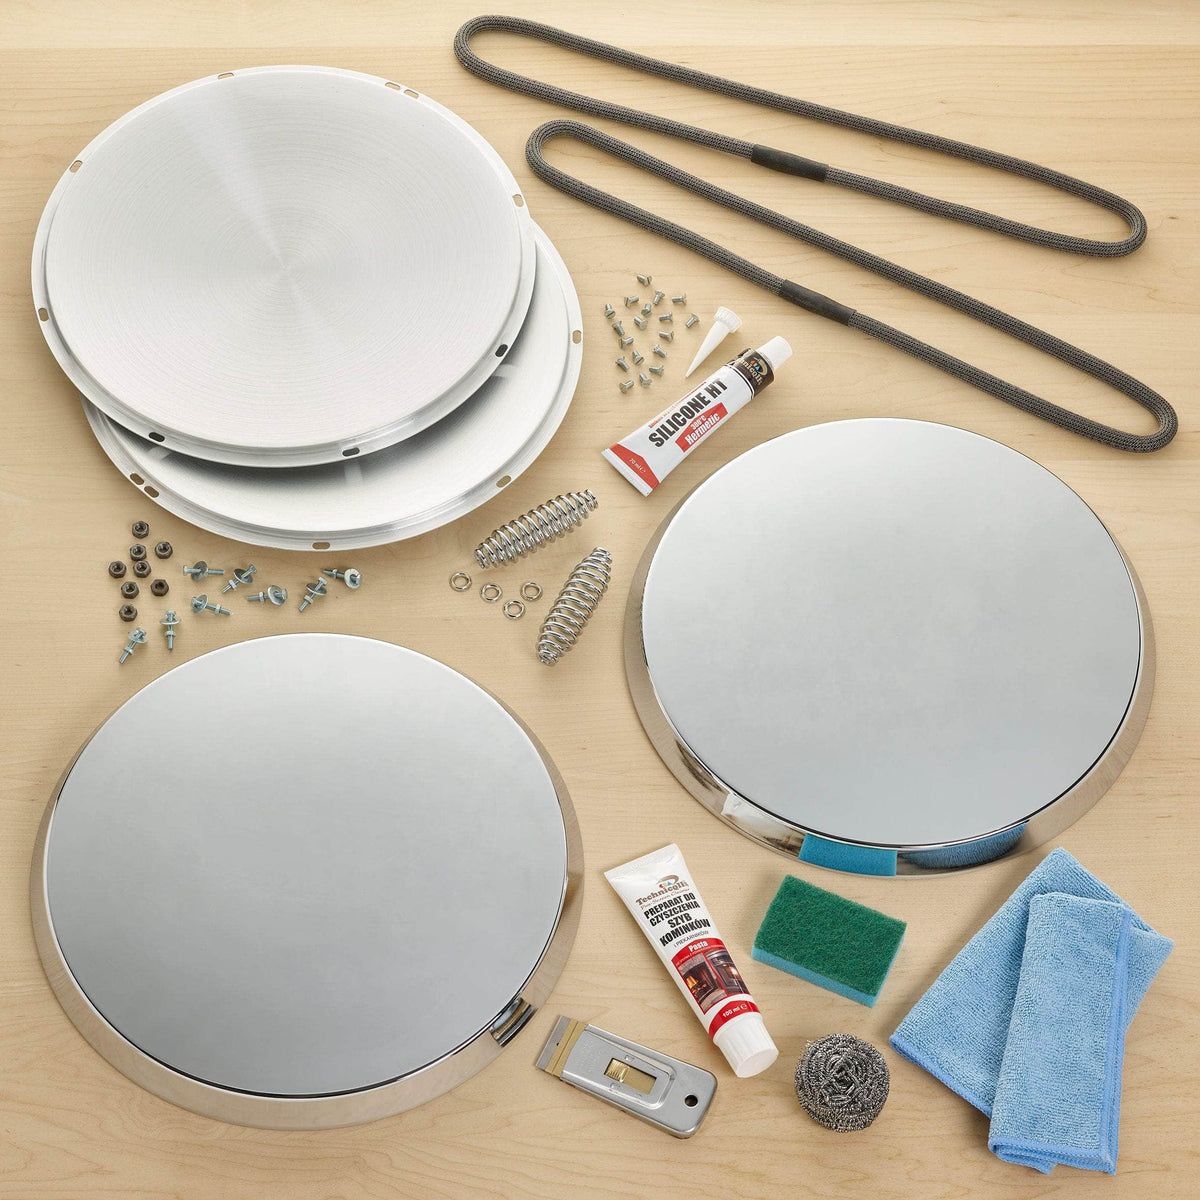 Complete Aluminium Lid Refurb Kit for use with Aga range cookers Shallow chrome tops (2.5cm) / 90mm to fit all Aga range cookers made pre-1994